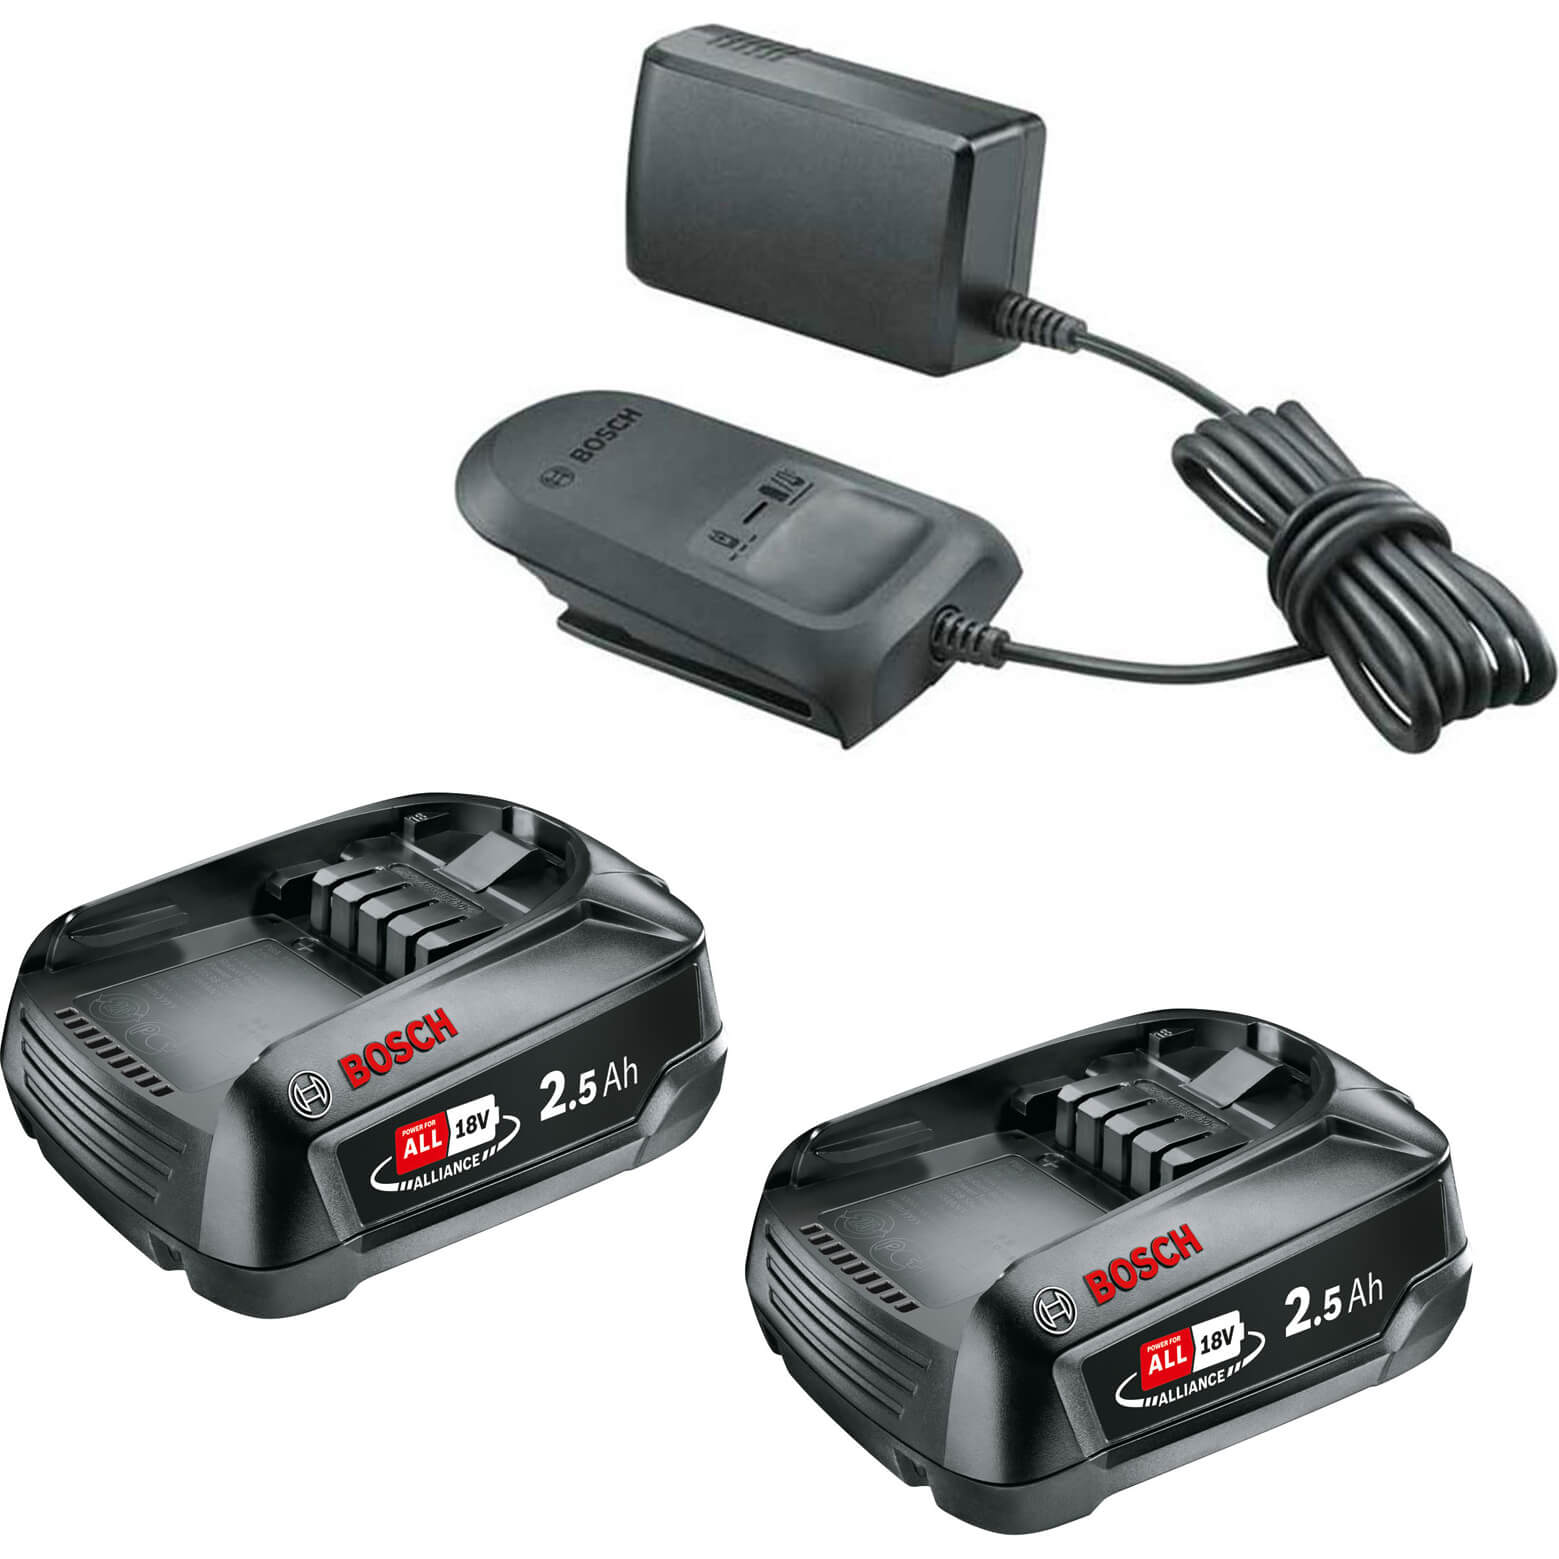 Image of Bosch Genuine GREEN 18v Cordless Li-ion Twin Battery 2.5ah and AL 1810 Charger 2.5ah